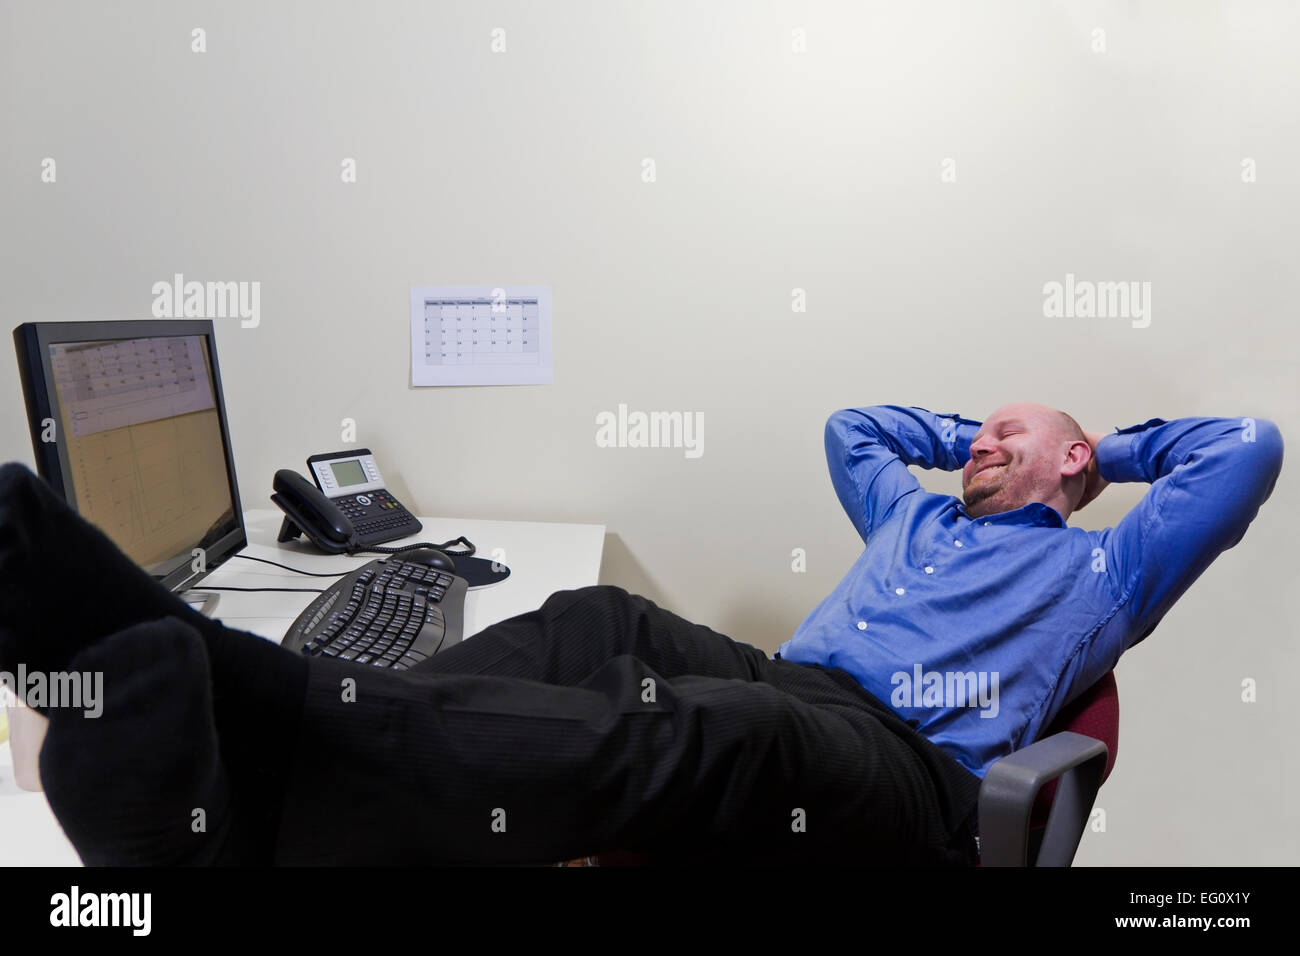 A office worker / businessman satisfied with what he has achieved. Stock Photo